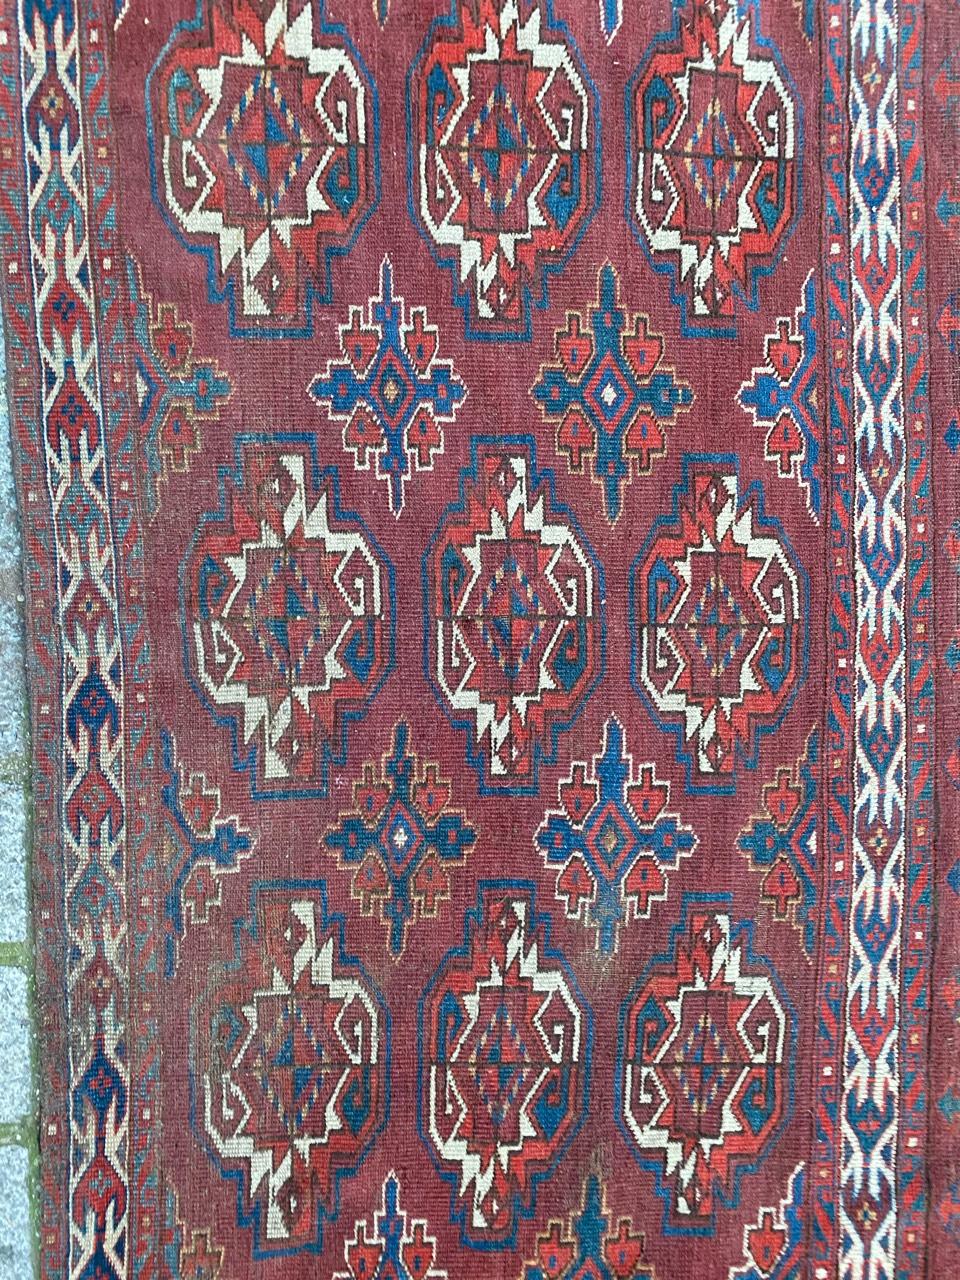 Nice 19th century horse cover Turkmen rug with a beautiful Bokhara design and natural colors with red, purple, orange and blue, entirely hand knotted with wool velvet on wool foundation.

✨✨✨
